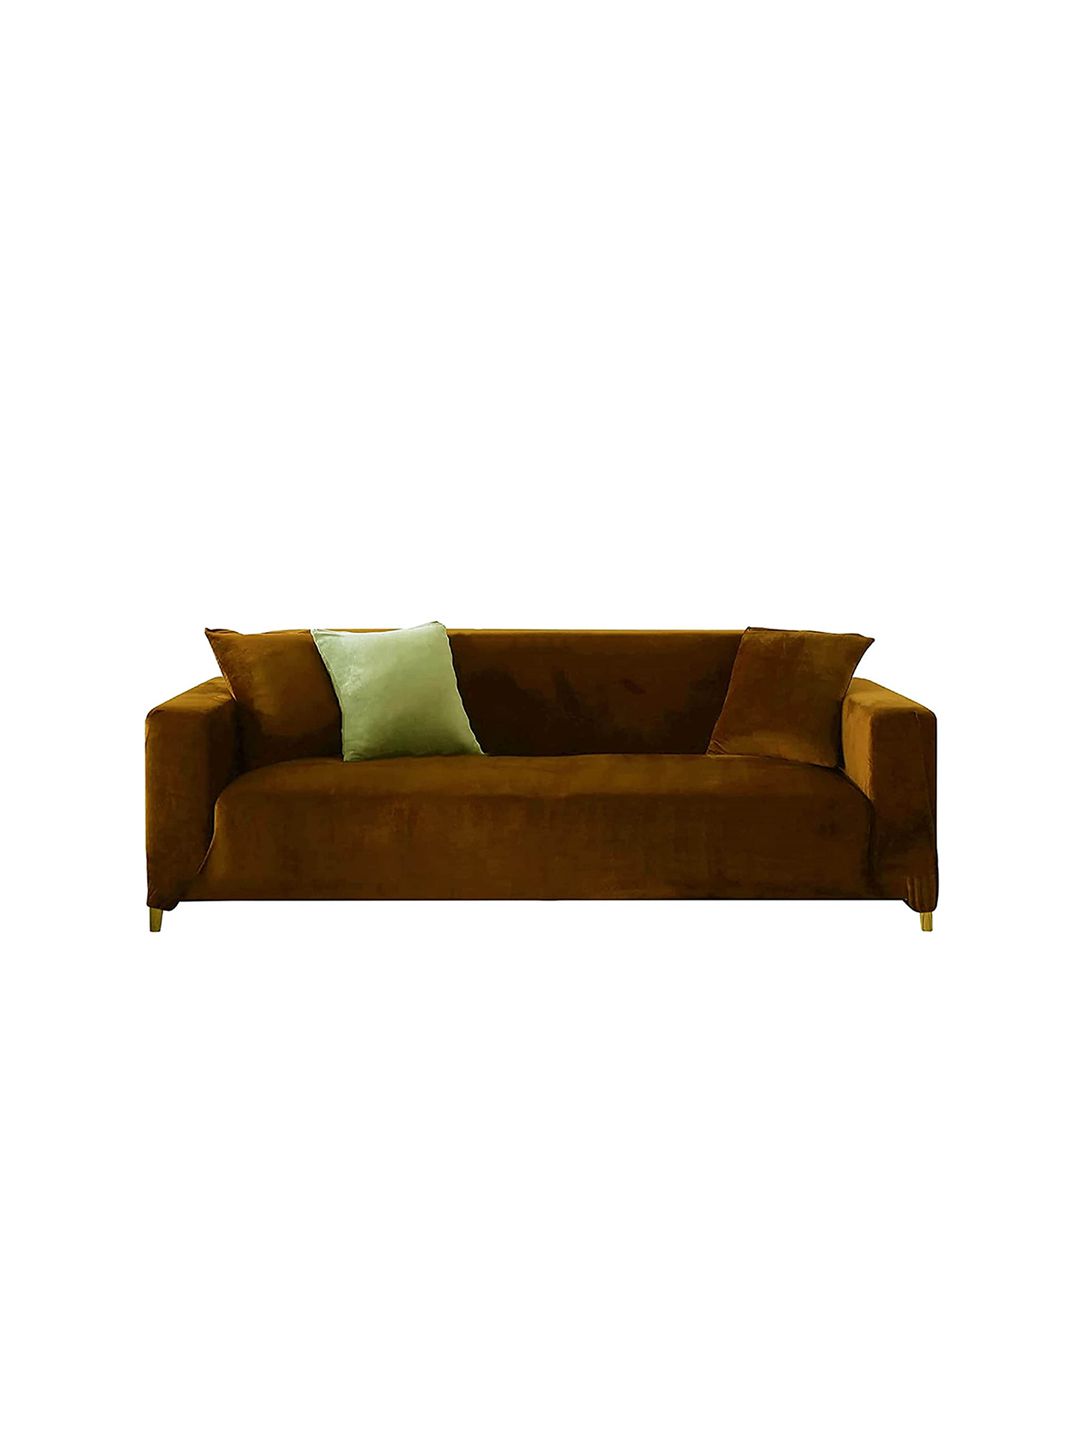 HOUSE OF QUIRK Brown Solid Velvet Four-Seater Sofa Cover Price in India